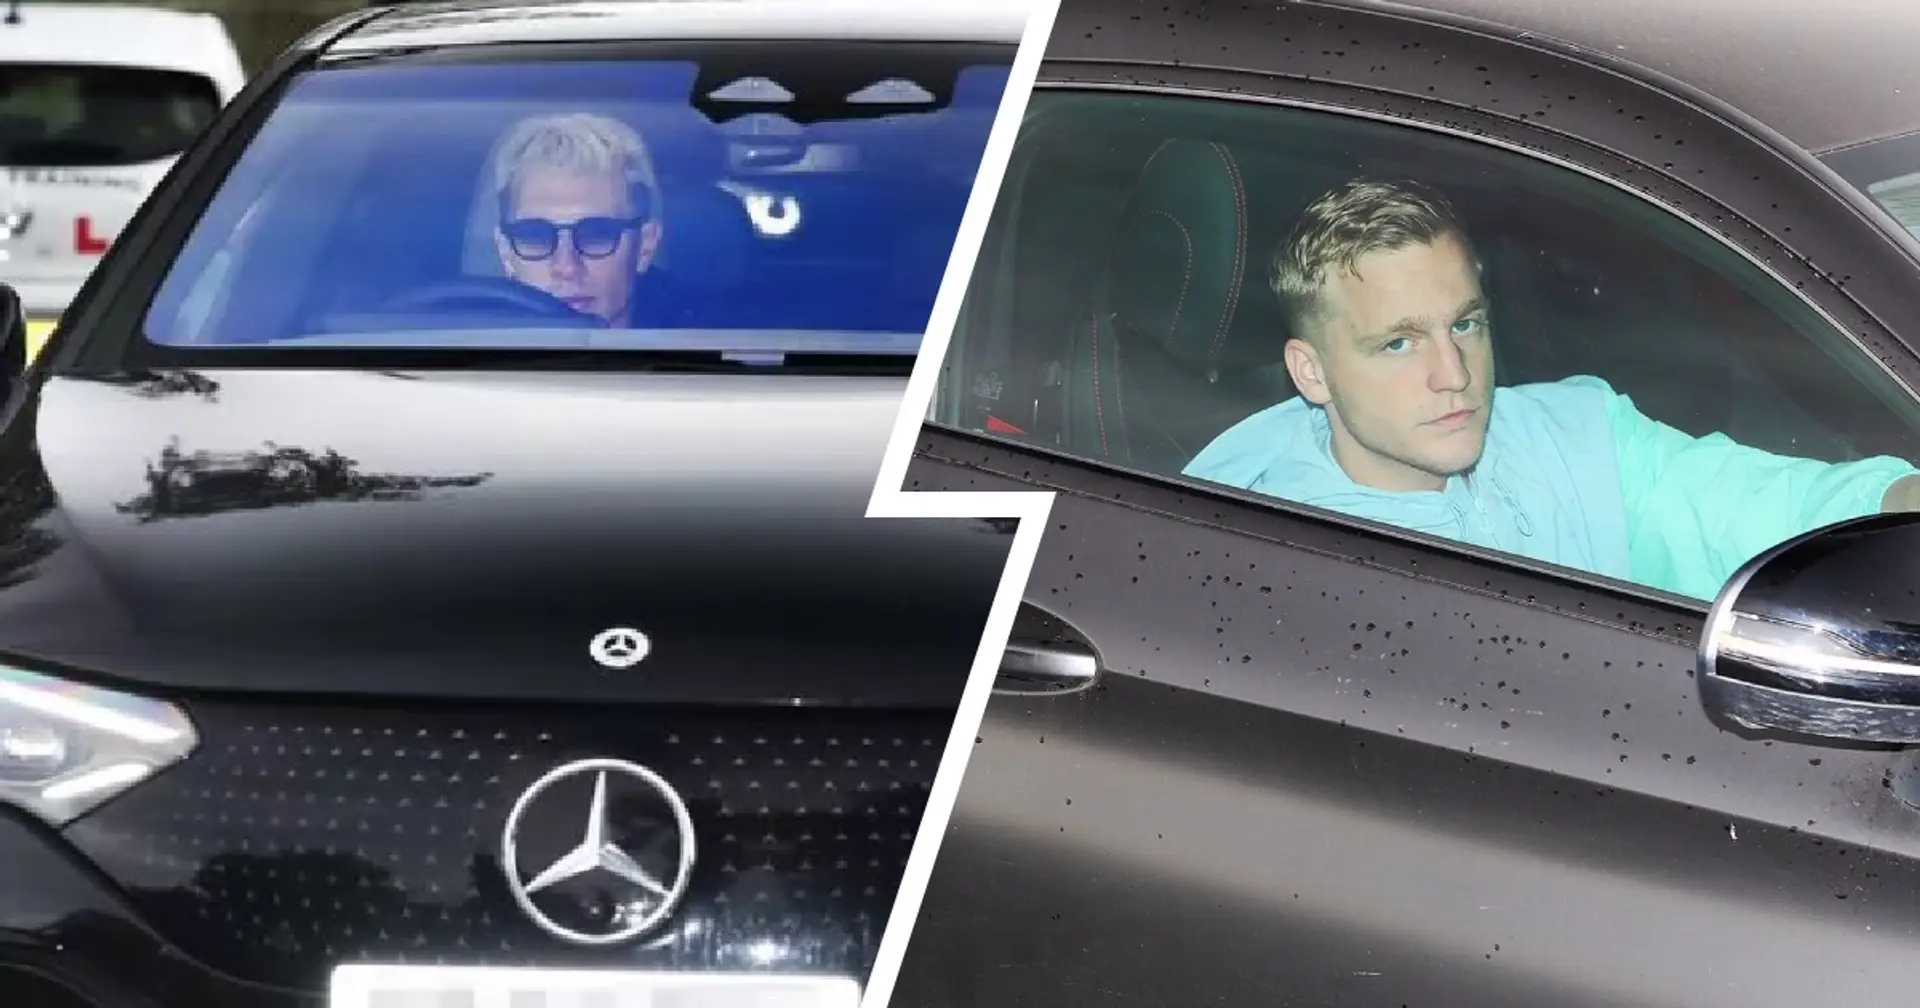 Licha & Van de Beek spotted! 5 best pictures as Man United players arrive for pre-season training 